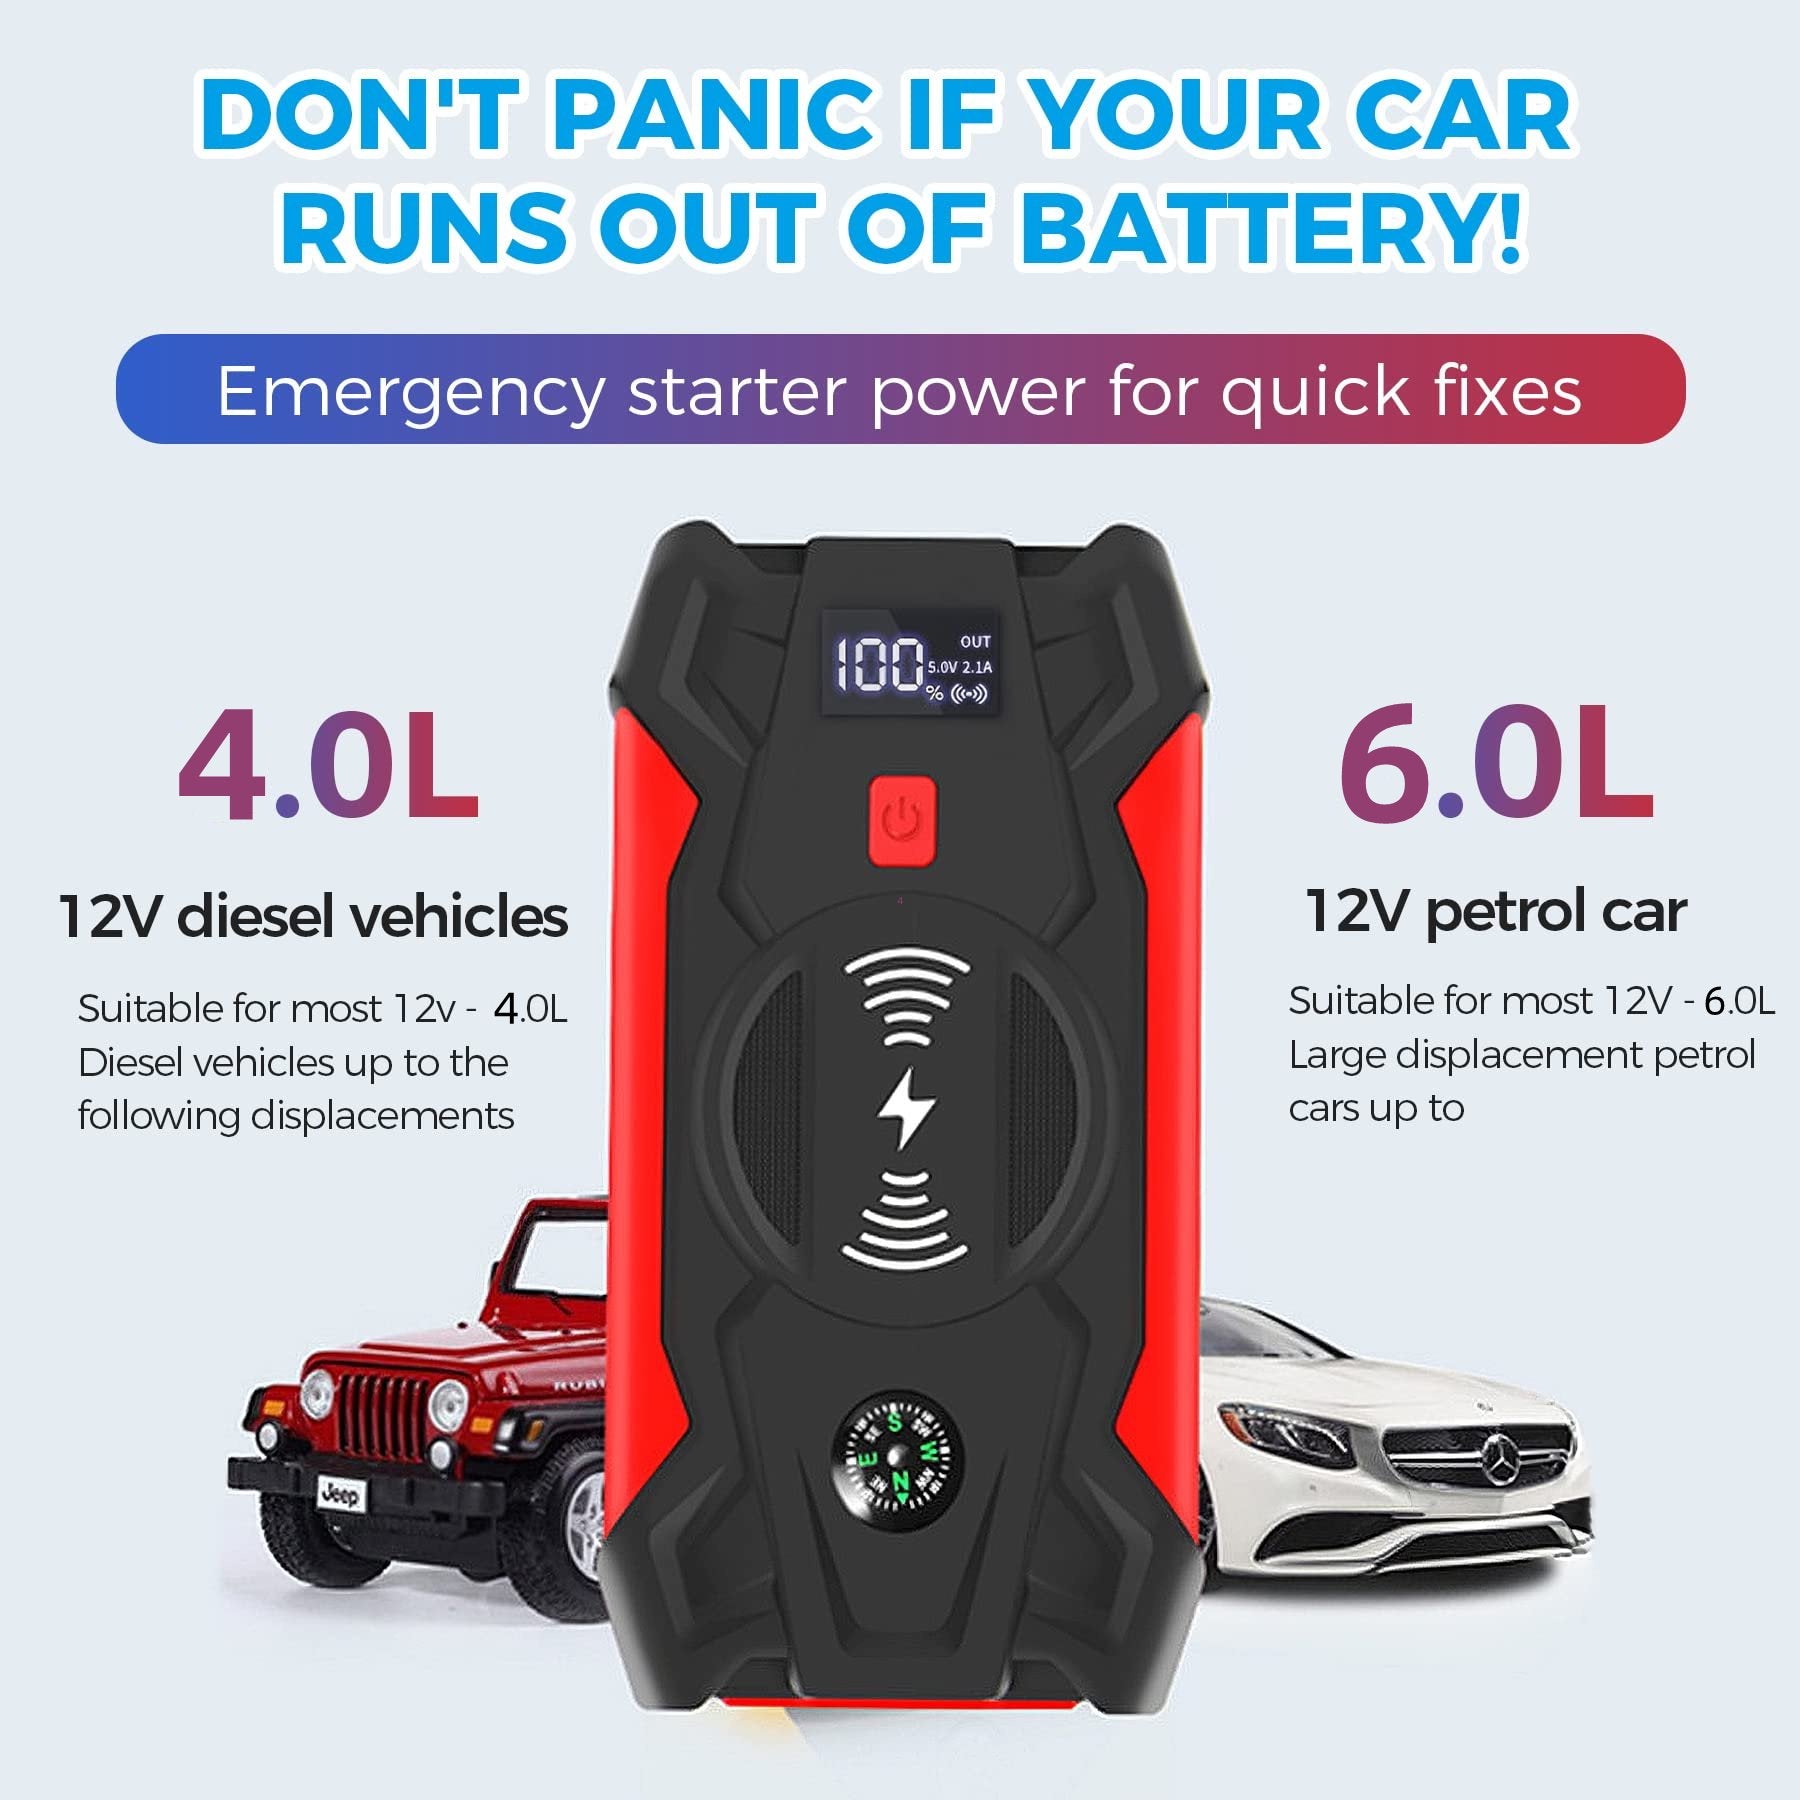 Doosl Car Jump Starter, 39800 mAh 1000A Peak 12V Car Battery Jump Pack with Portable Case and Flashlight, Dual USB Quick Charge, Car Auto Battery Booster Apply up to 6L Gas or 4L Diesel Engine, J13